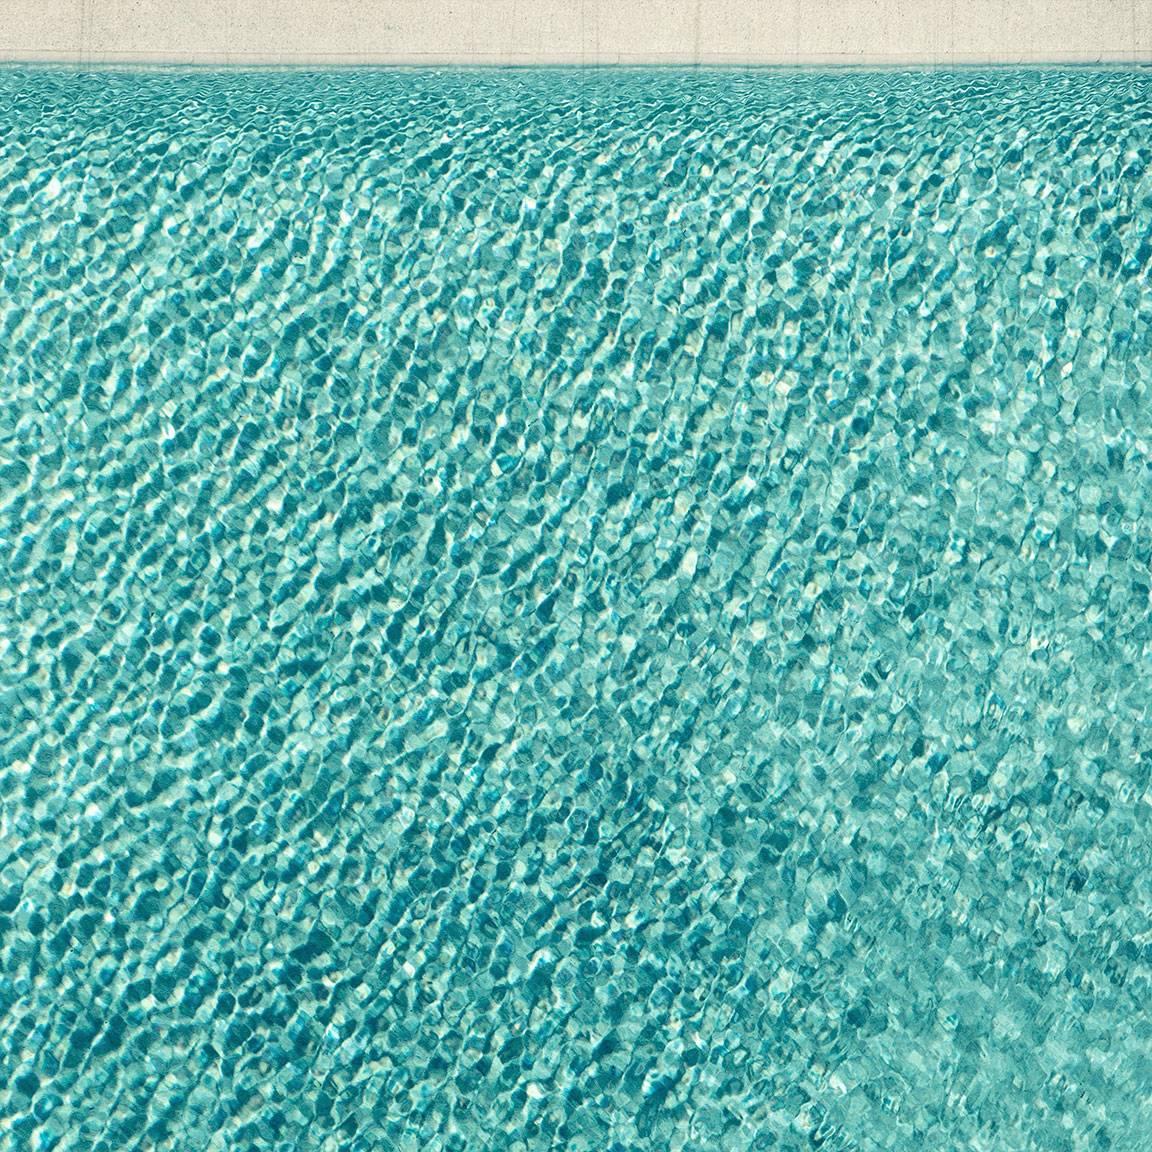 Thomas Hager Abstract Photograph - Pool Side - 2